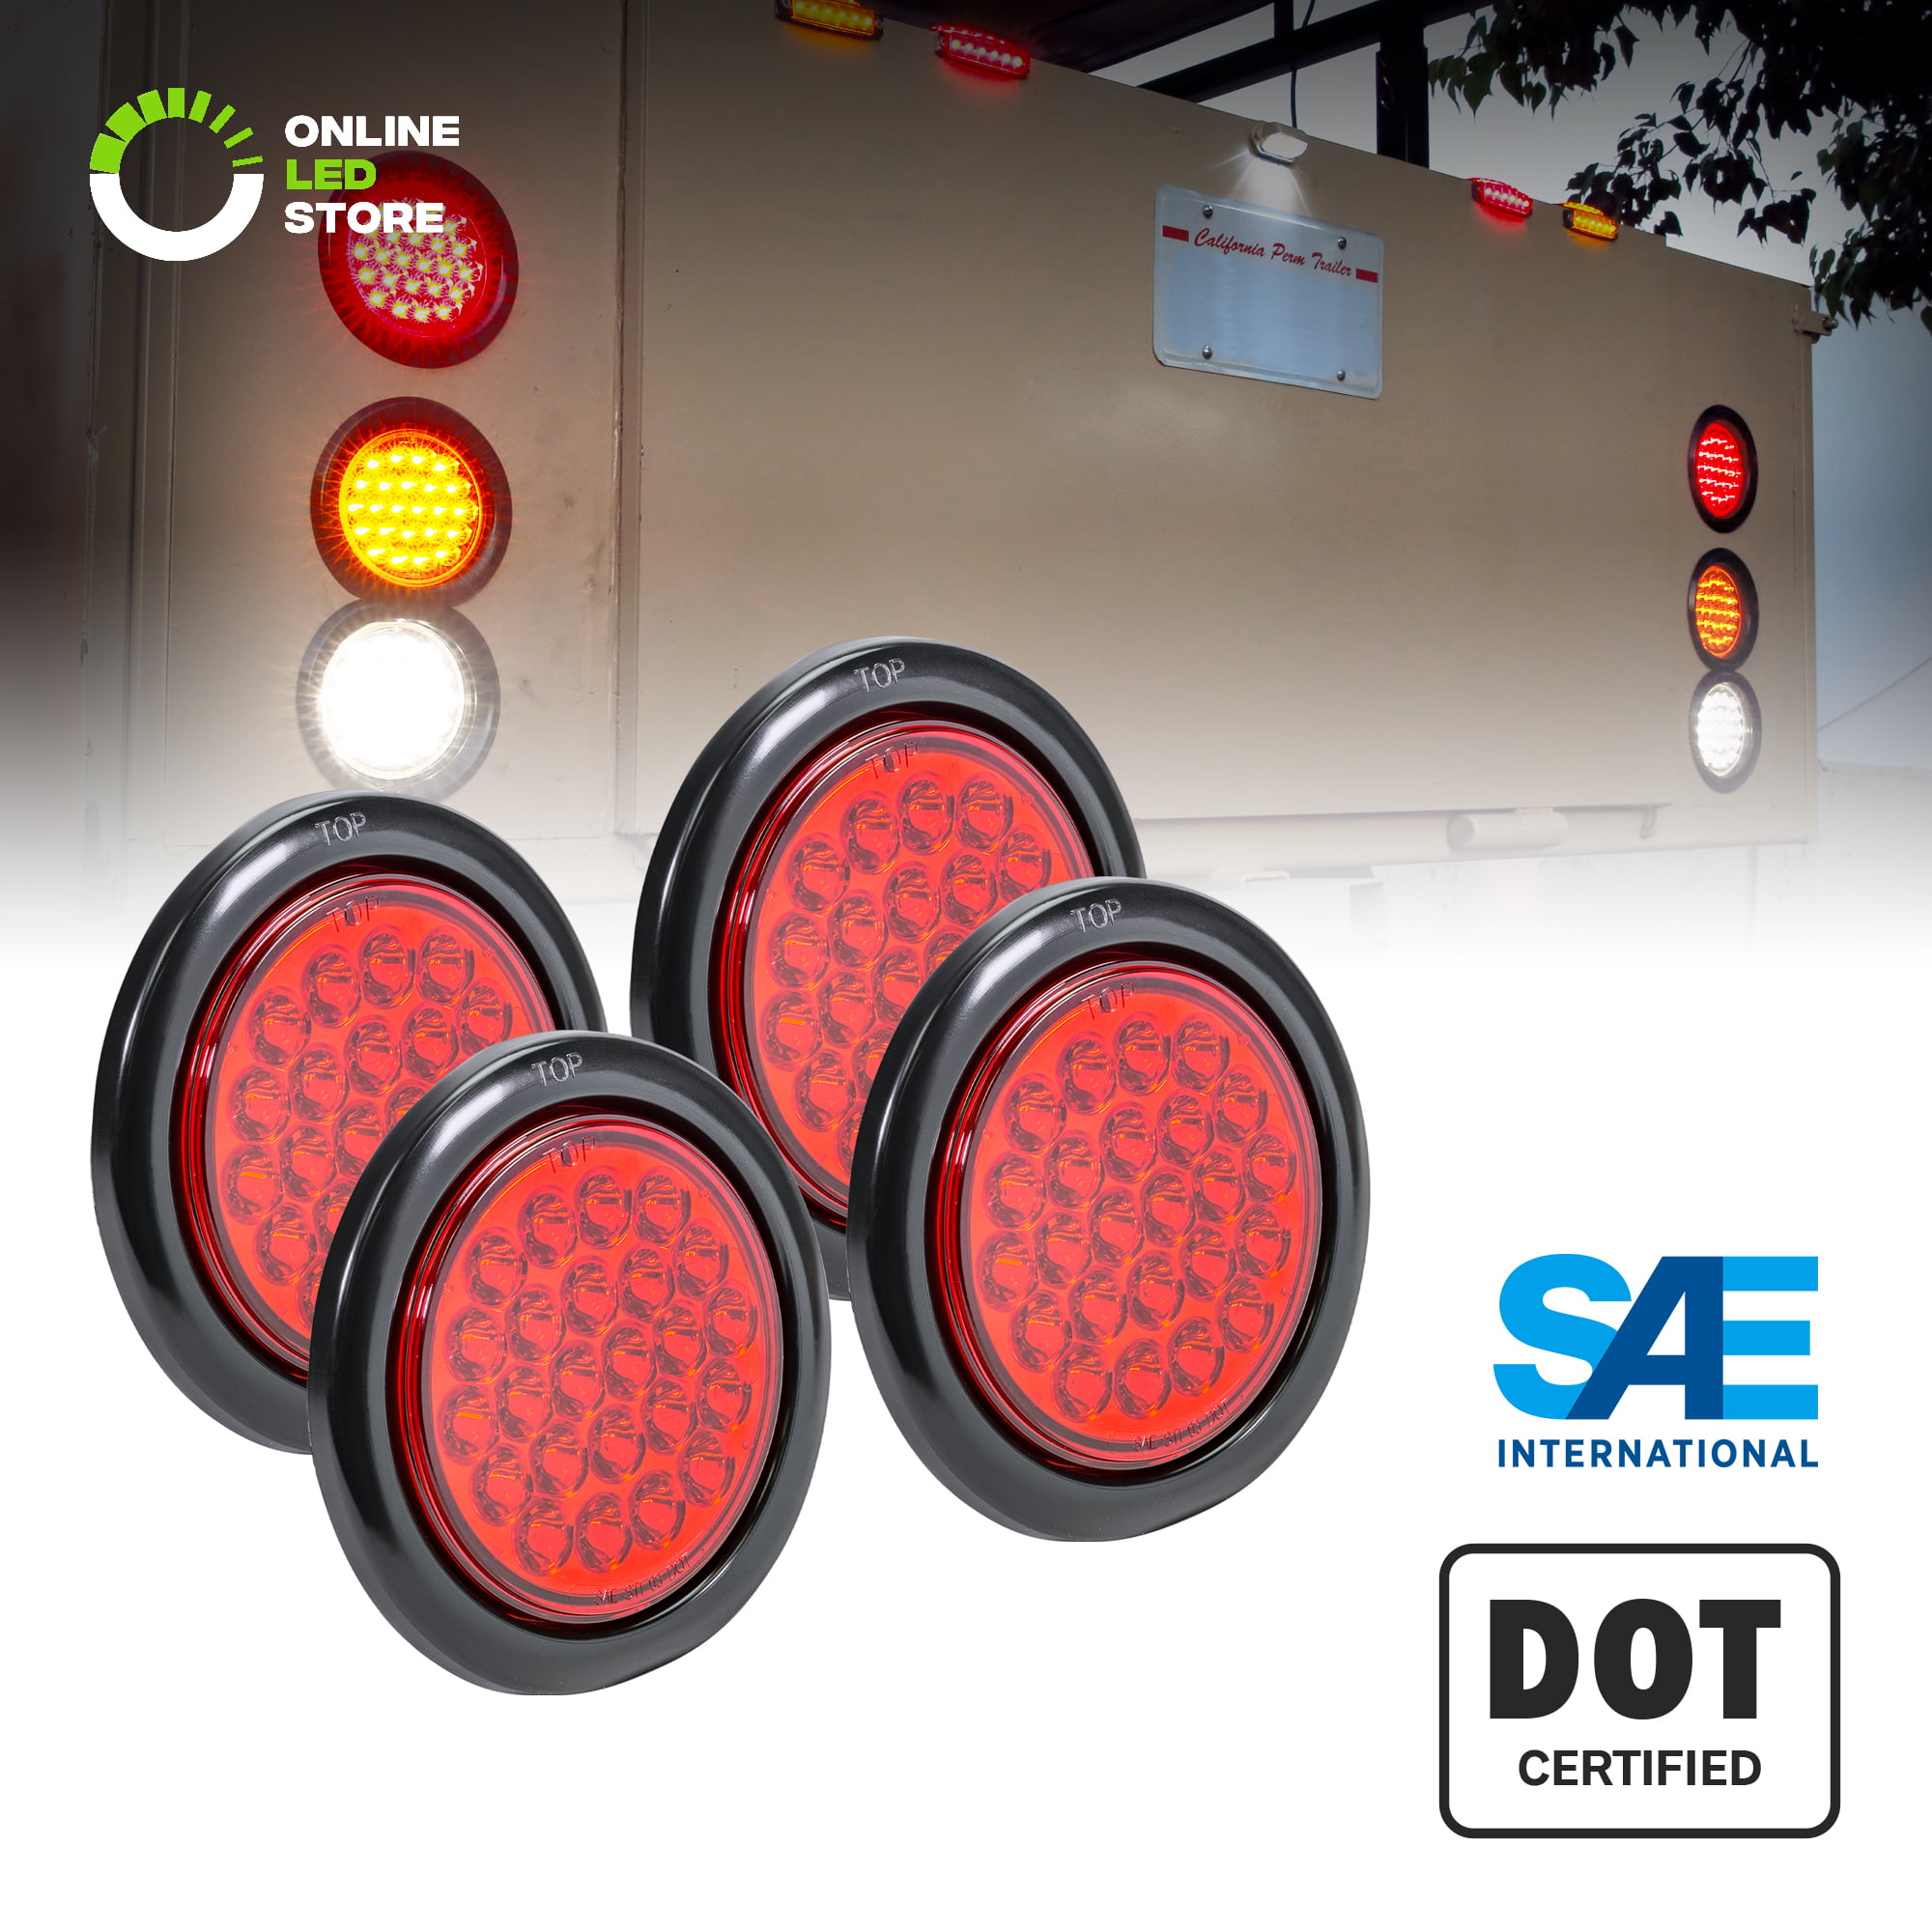 Grommet & Plug Included DOT Certified IP67 Waterproof Turn Stop Brake Trailer Lights for RV Jeep Trucks 4 Round Red 24 LED Trailer Tail Lights 